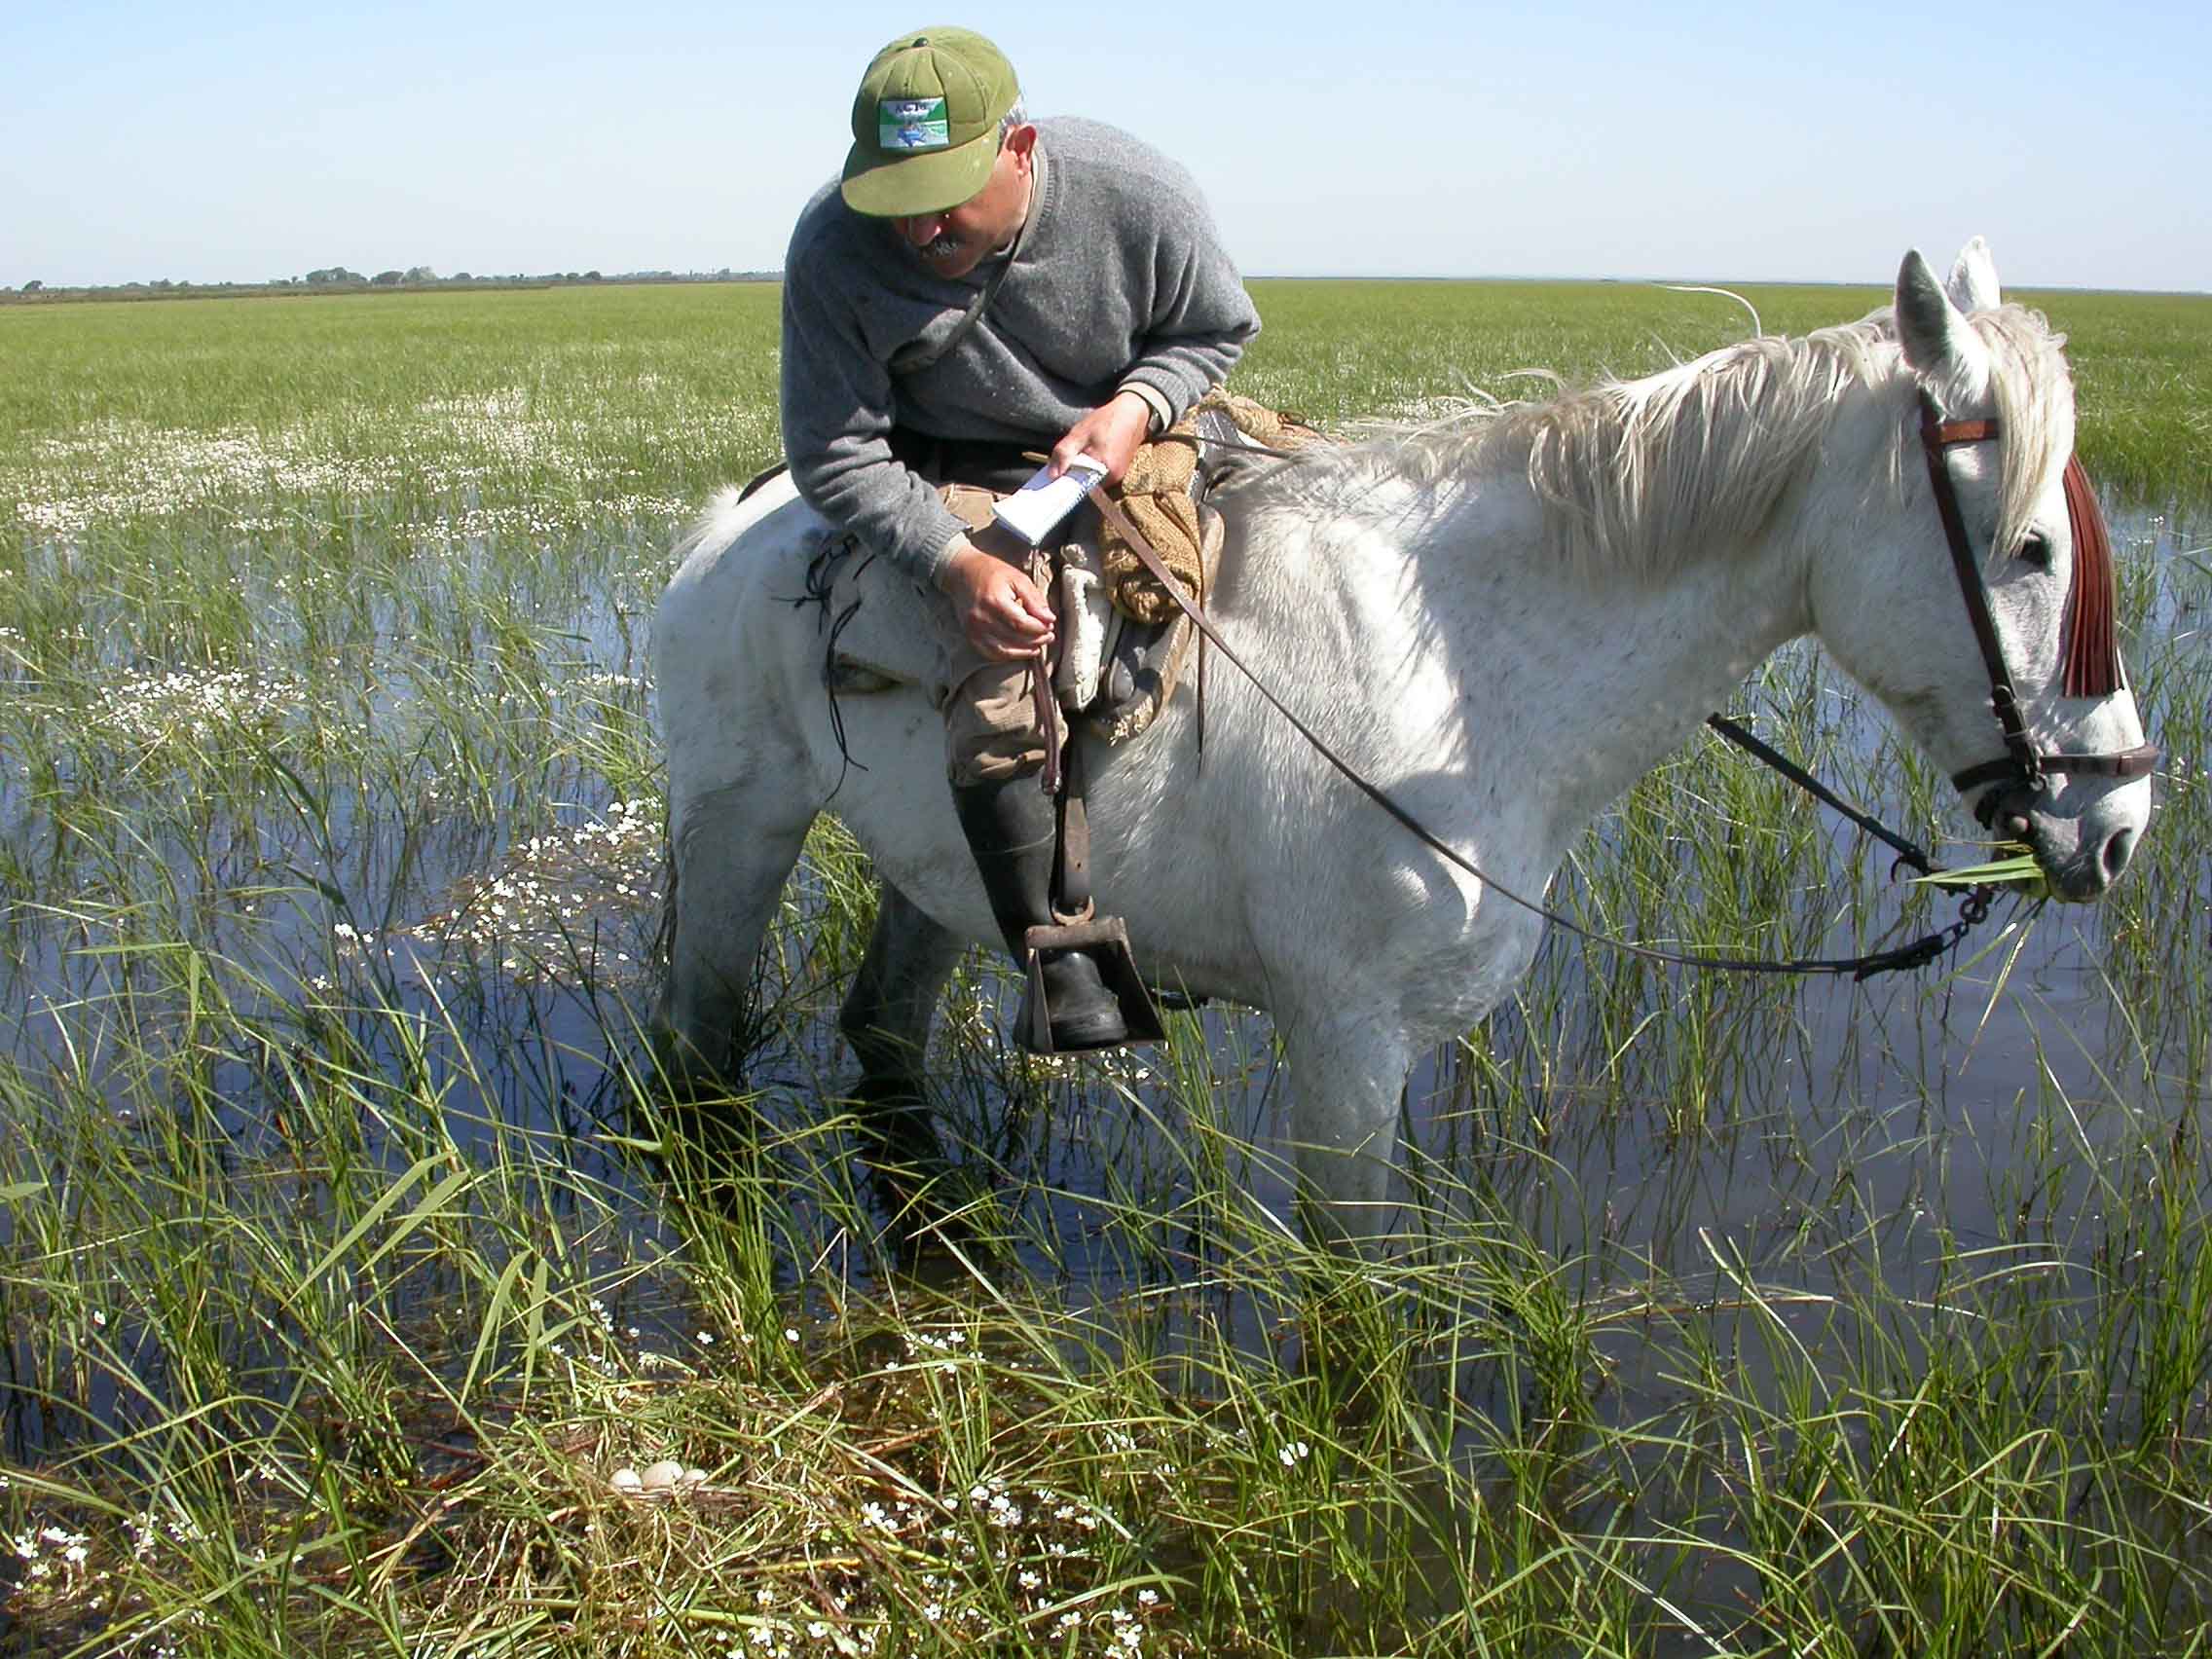 A member of the Doñana Biological Station monitoring team counts waterbird nests in the Doñana marsh. Water extraction and climate change threaten to shorten the time the marsh spends flooded each year, making successful breeding less likely. Credit: Rubén Rodríguez, EBD-CSIC 